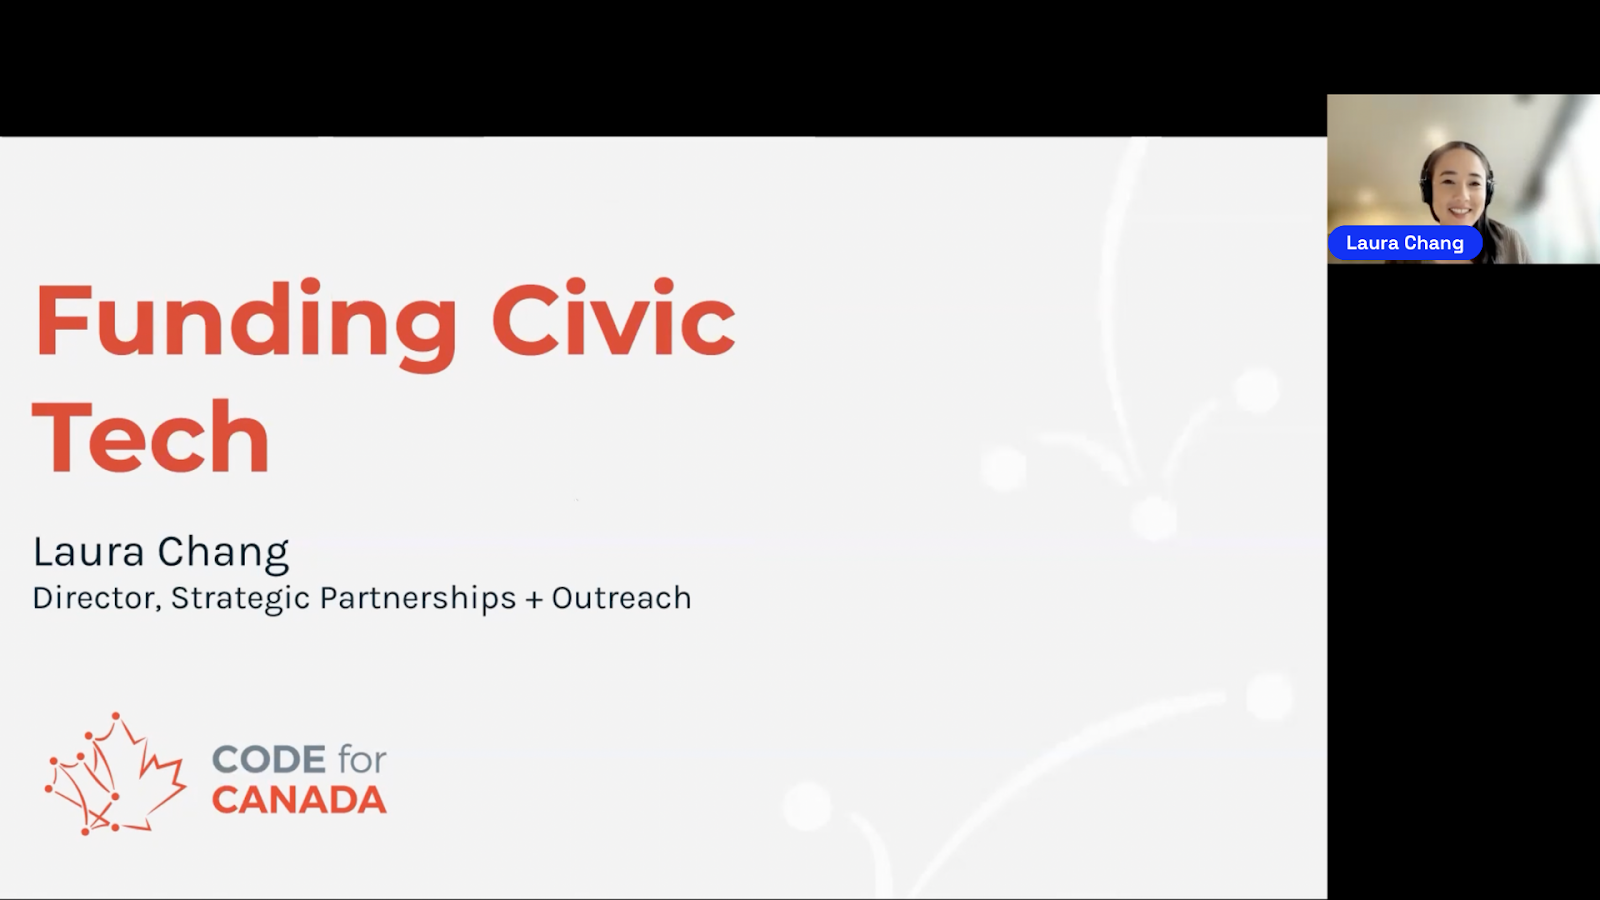 Screenshot of a presentation slide on Zoom. The text on the slide is "Funding Civic Tech. Laura Chang, Director, Strategic Partnerships + Outreach. Code for Canada".